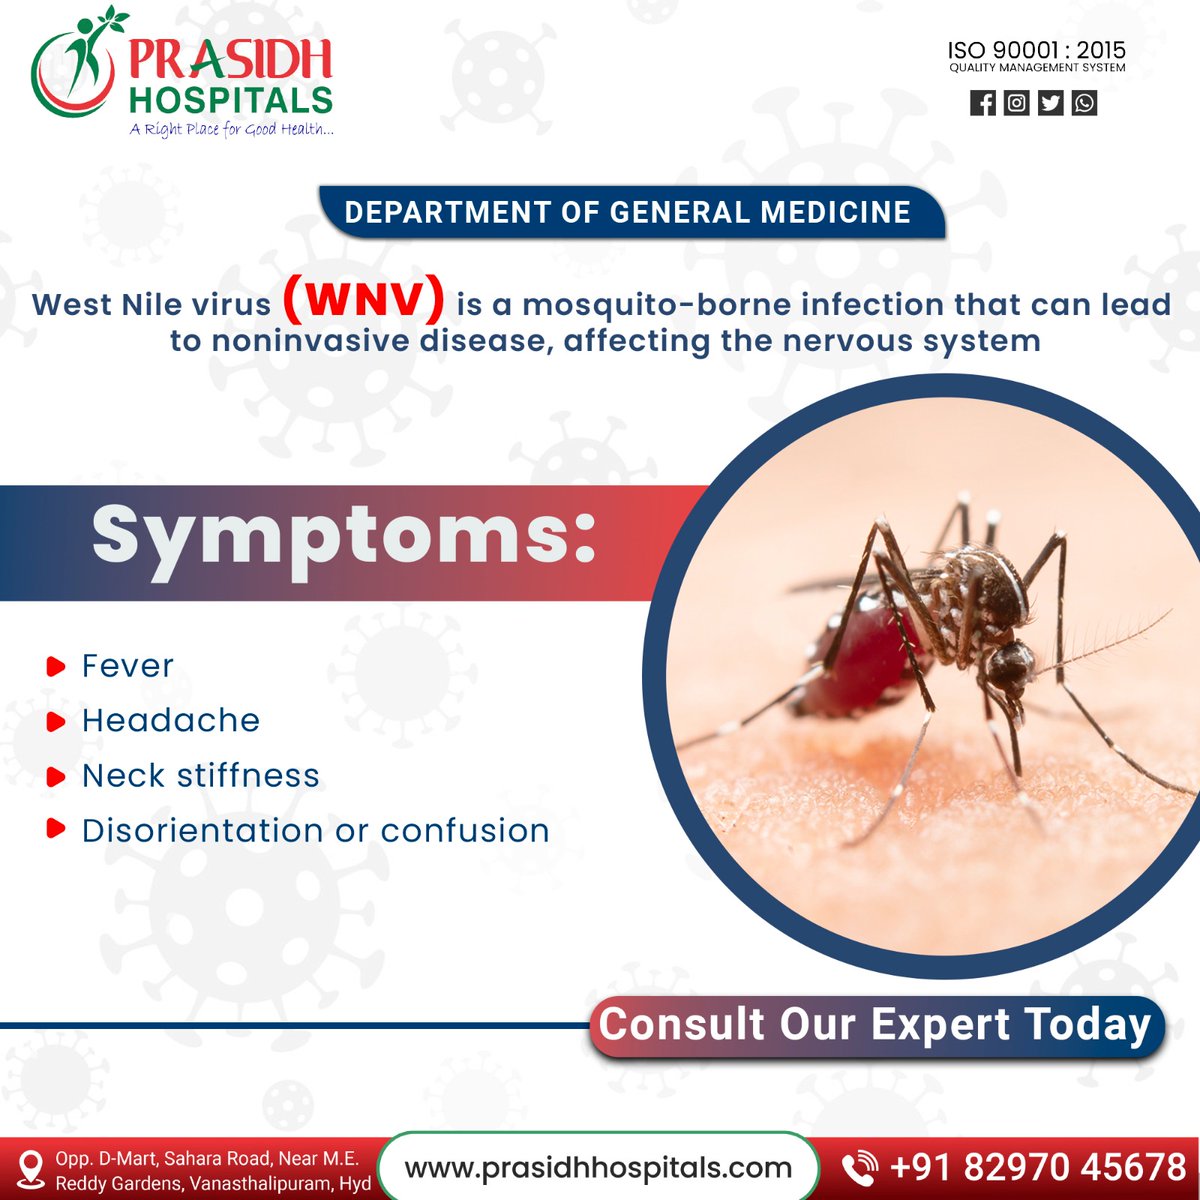 West Nile virus (WNV) is a mosquito-borne infection affecting the nervous system, leading to symptoms like fever, headache, neck stiffness, and confusion. While the probability of contracting WNV varies, prompt treatment is crucial.

#generalmedicine #wnv #infection #fever